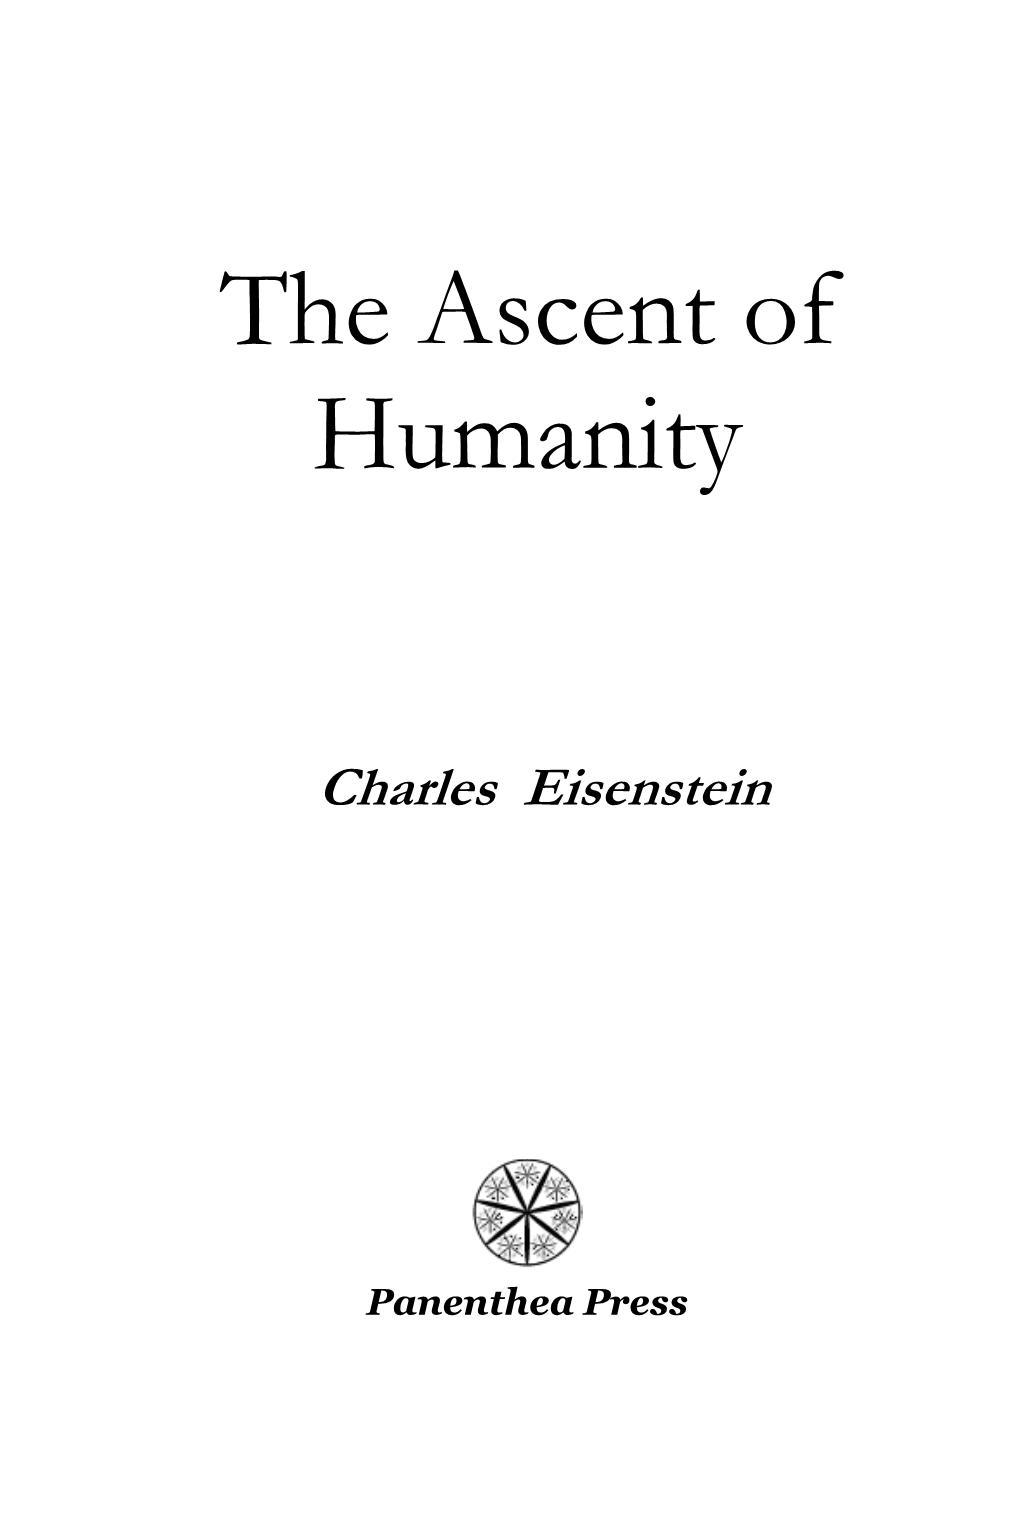 The Ascent of Humanity.Pdf